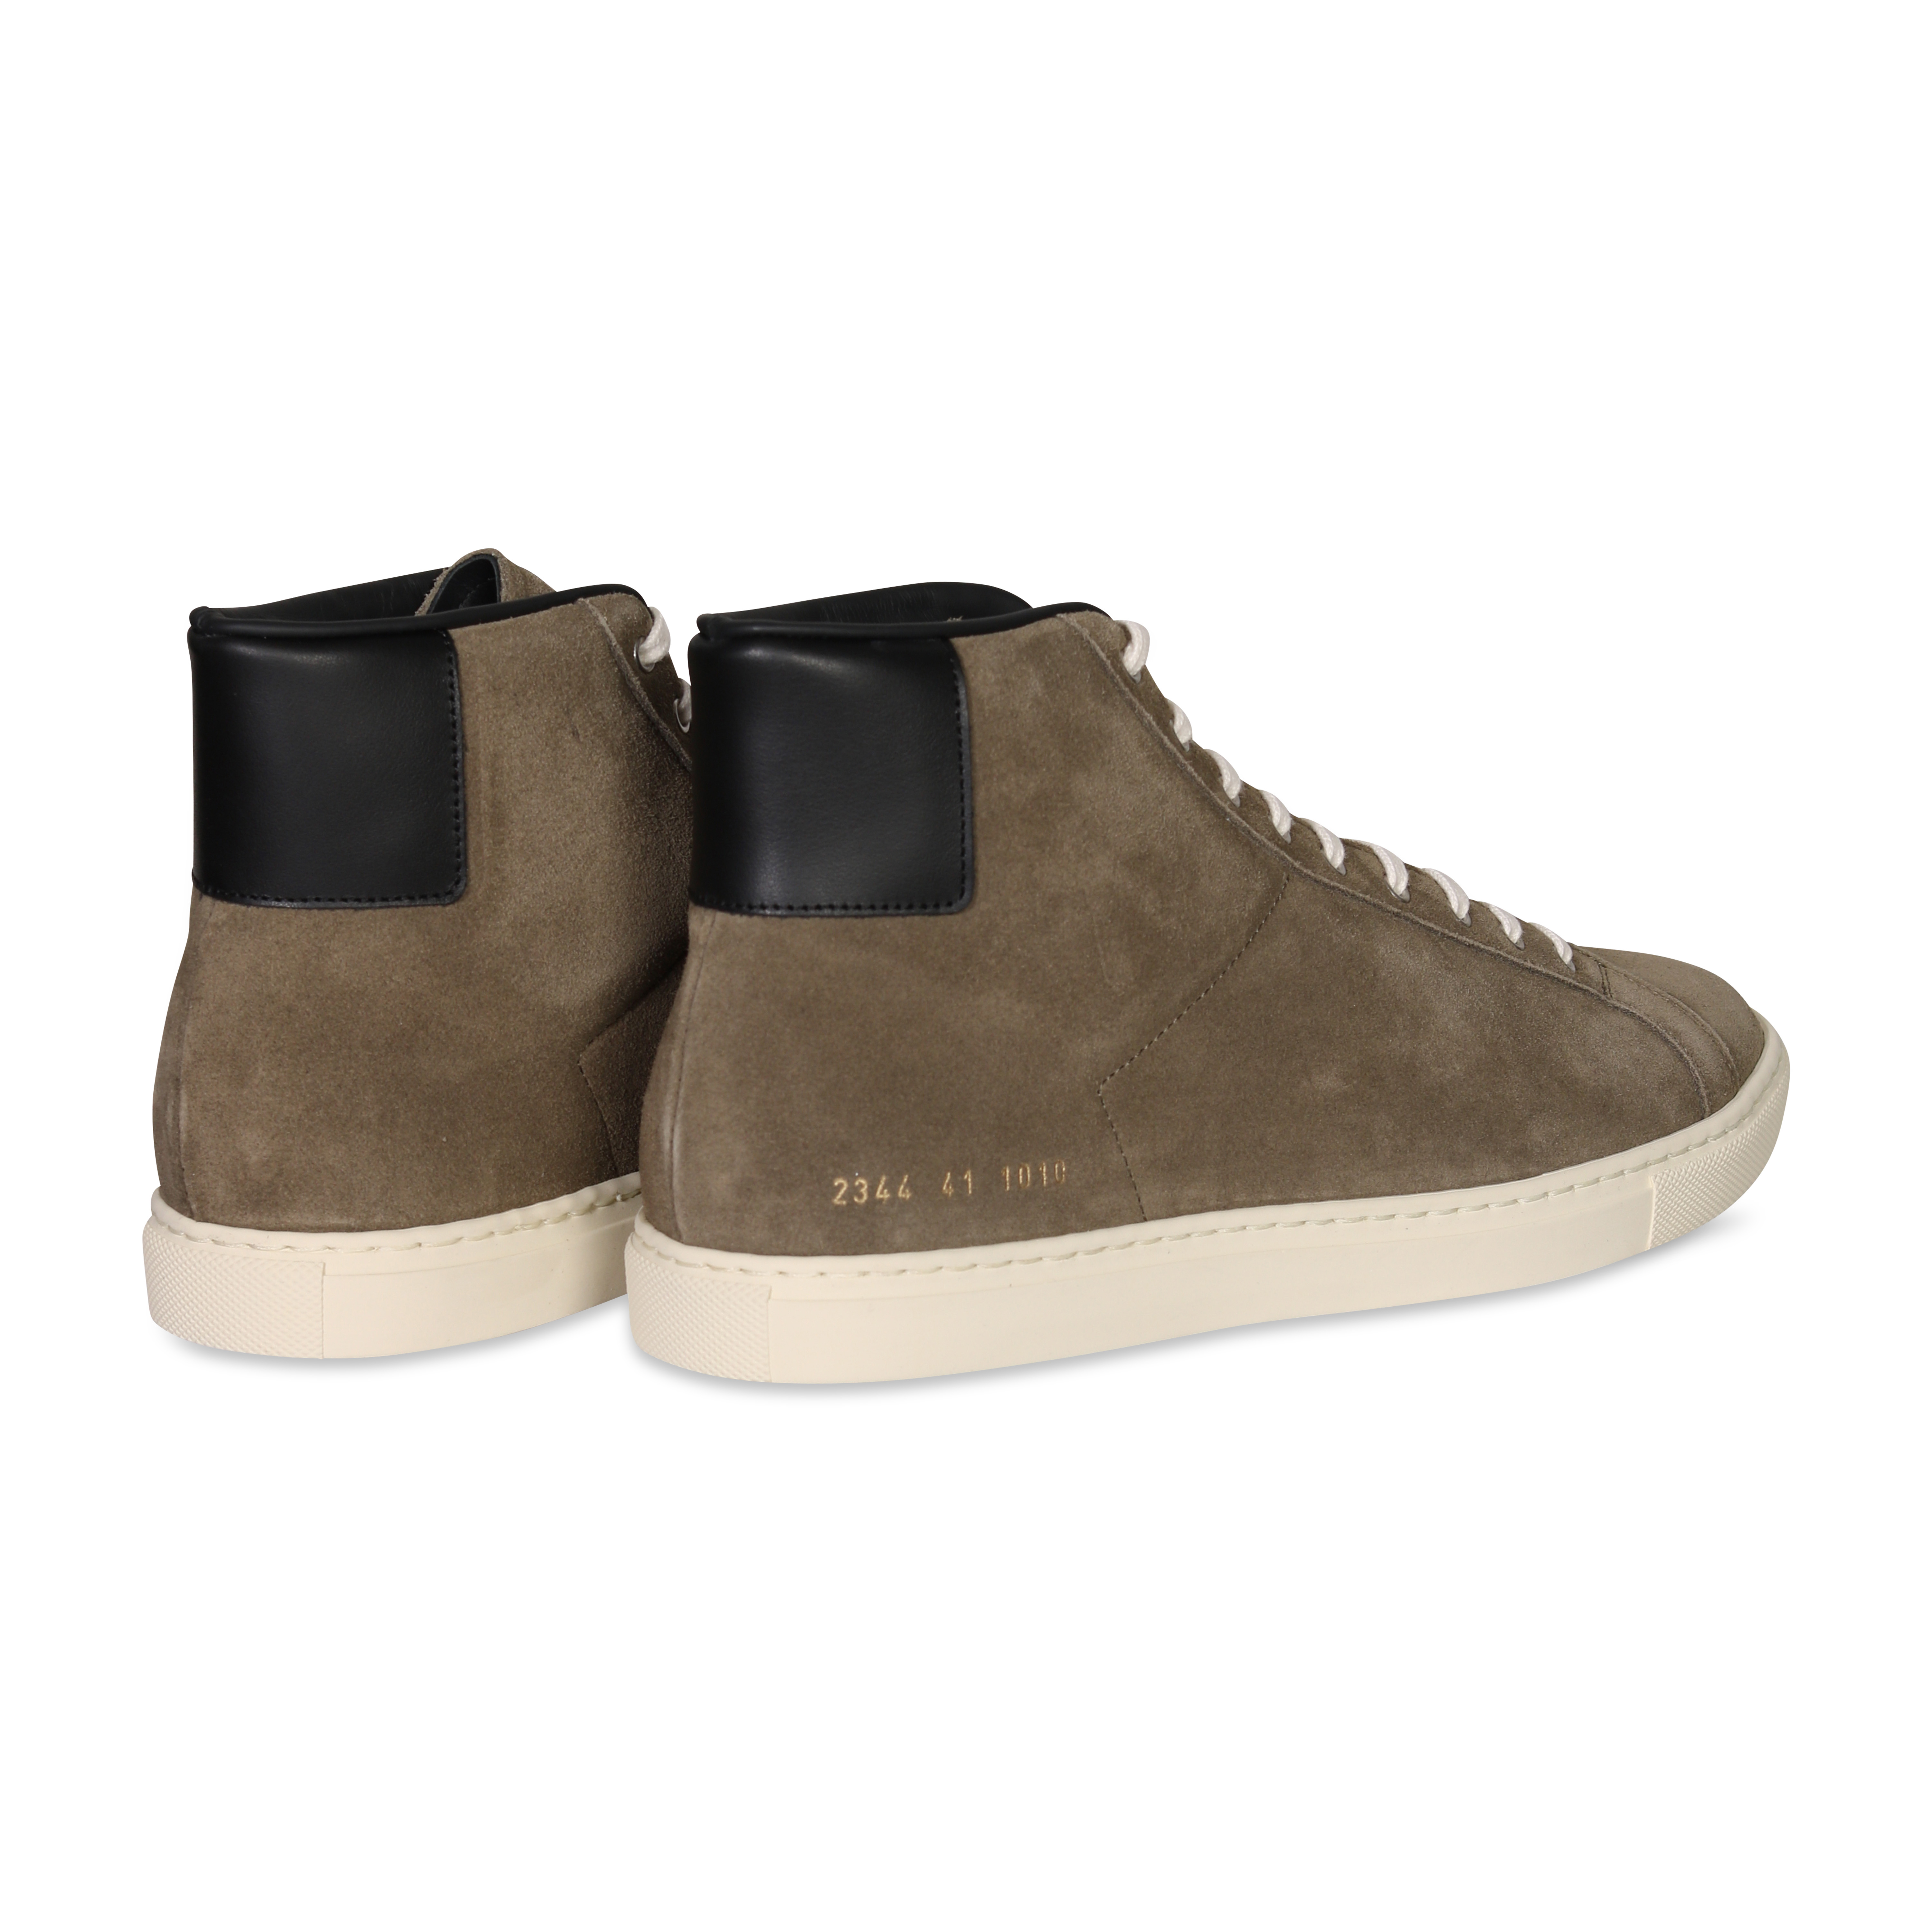 Common Projects Sneaker Retro High in Suede 40